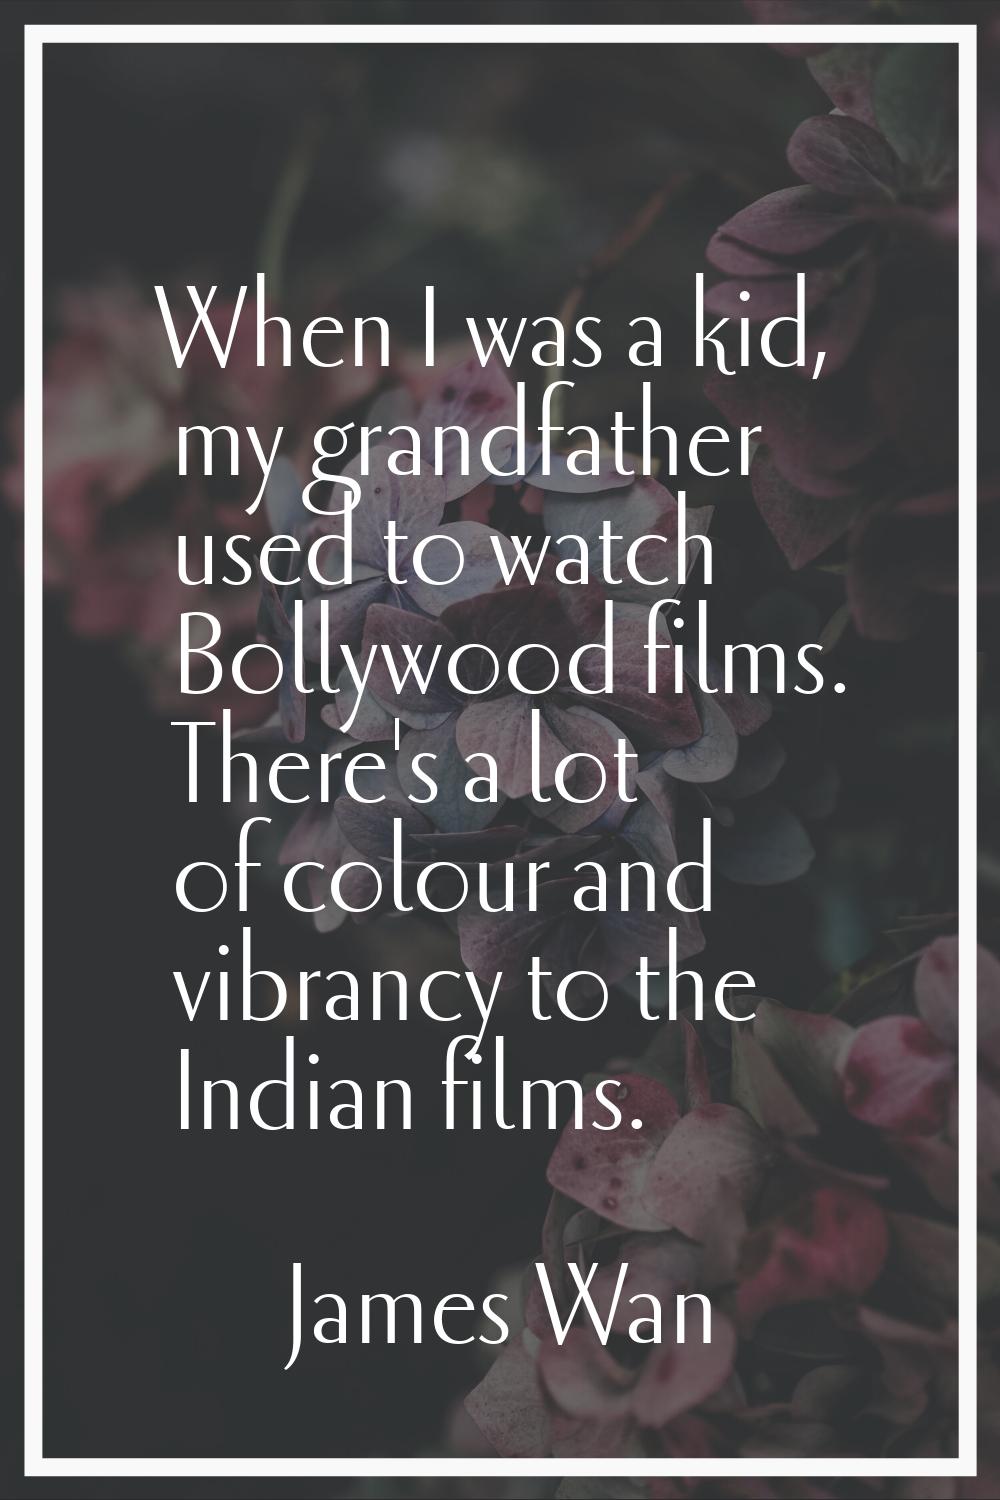 When I was a kid, my grandfather used to watch Bollywood films. There's a lot of colour and vibranc